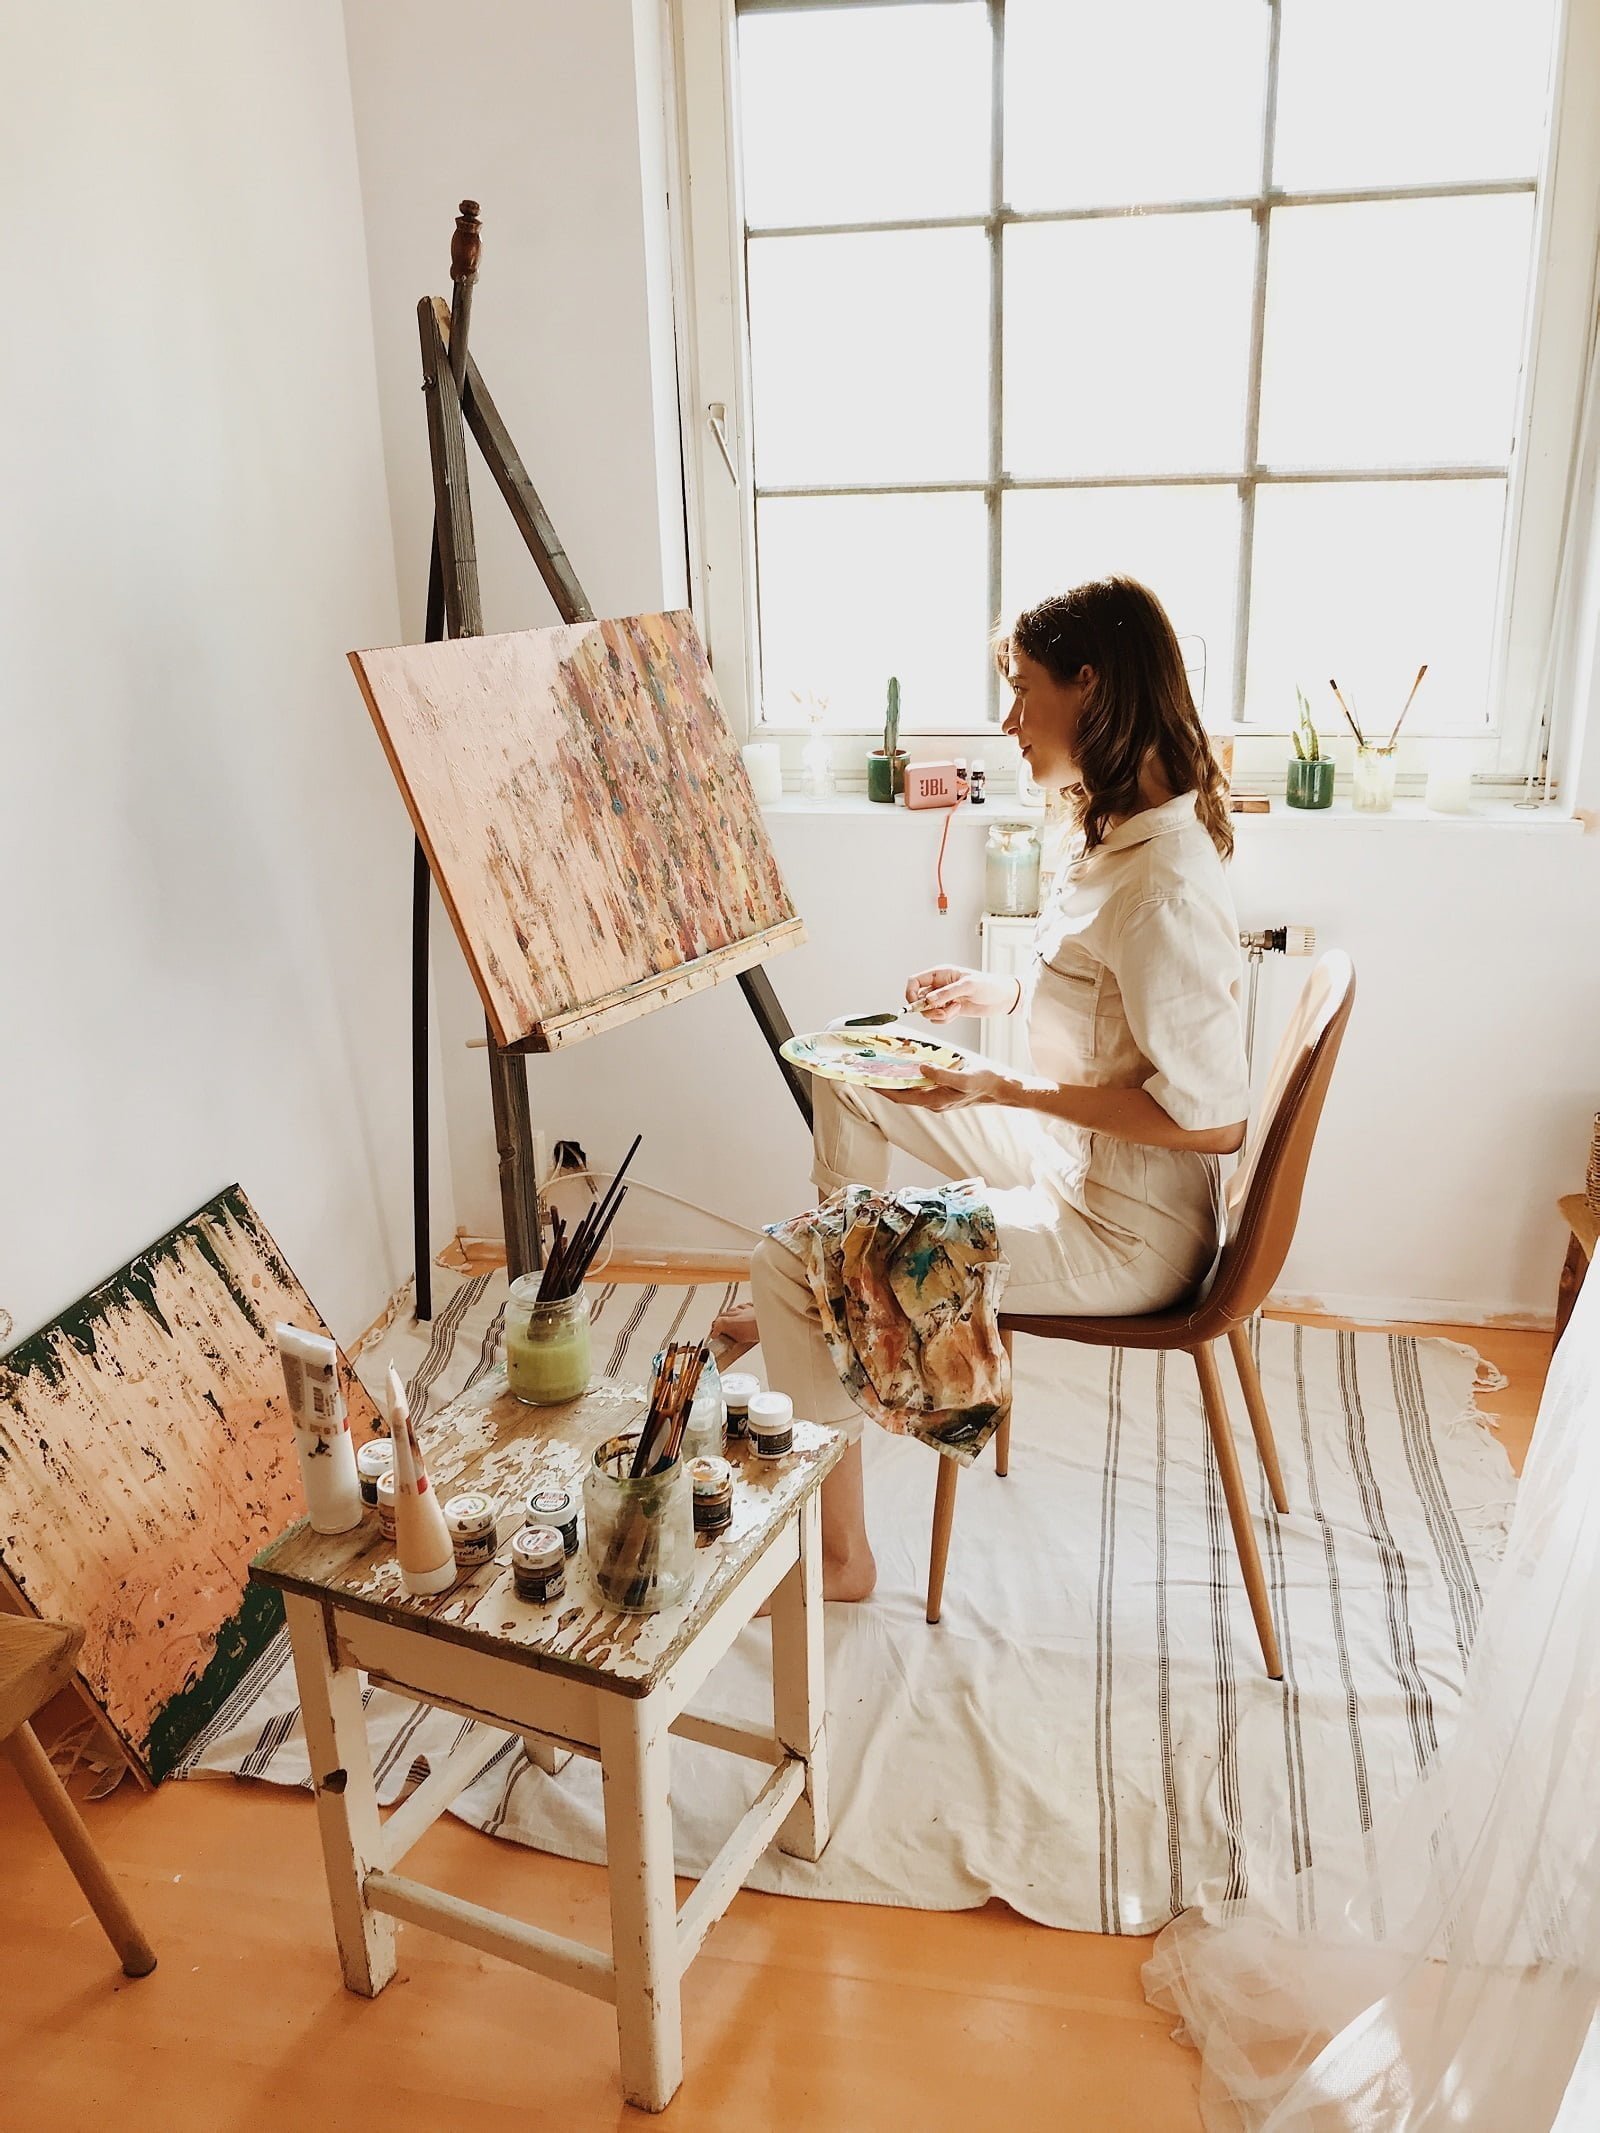 Sustainability in the Art World: Female painter wearing white at work in her studio